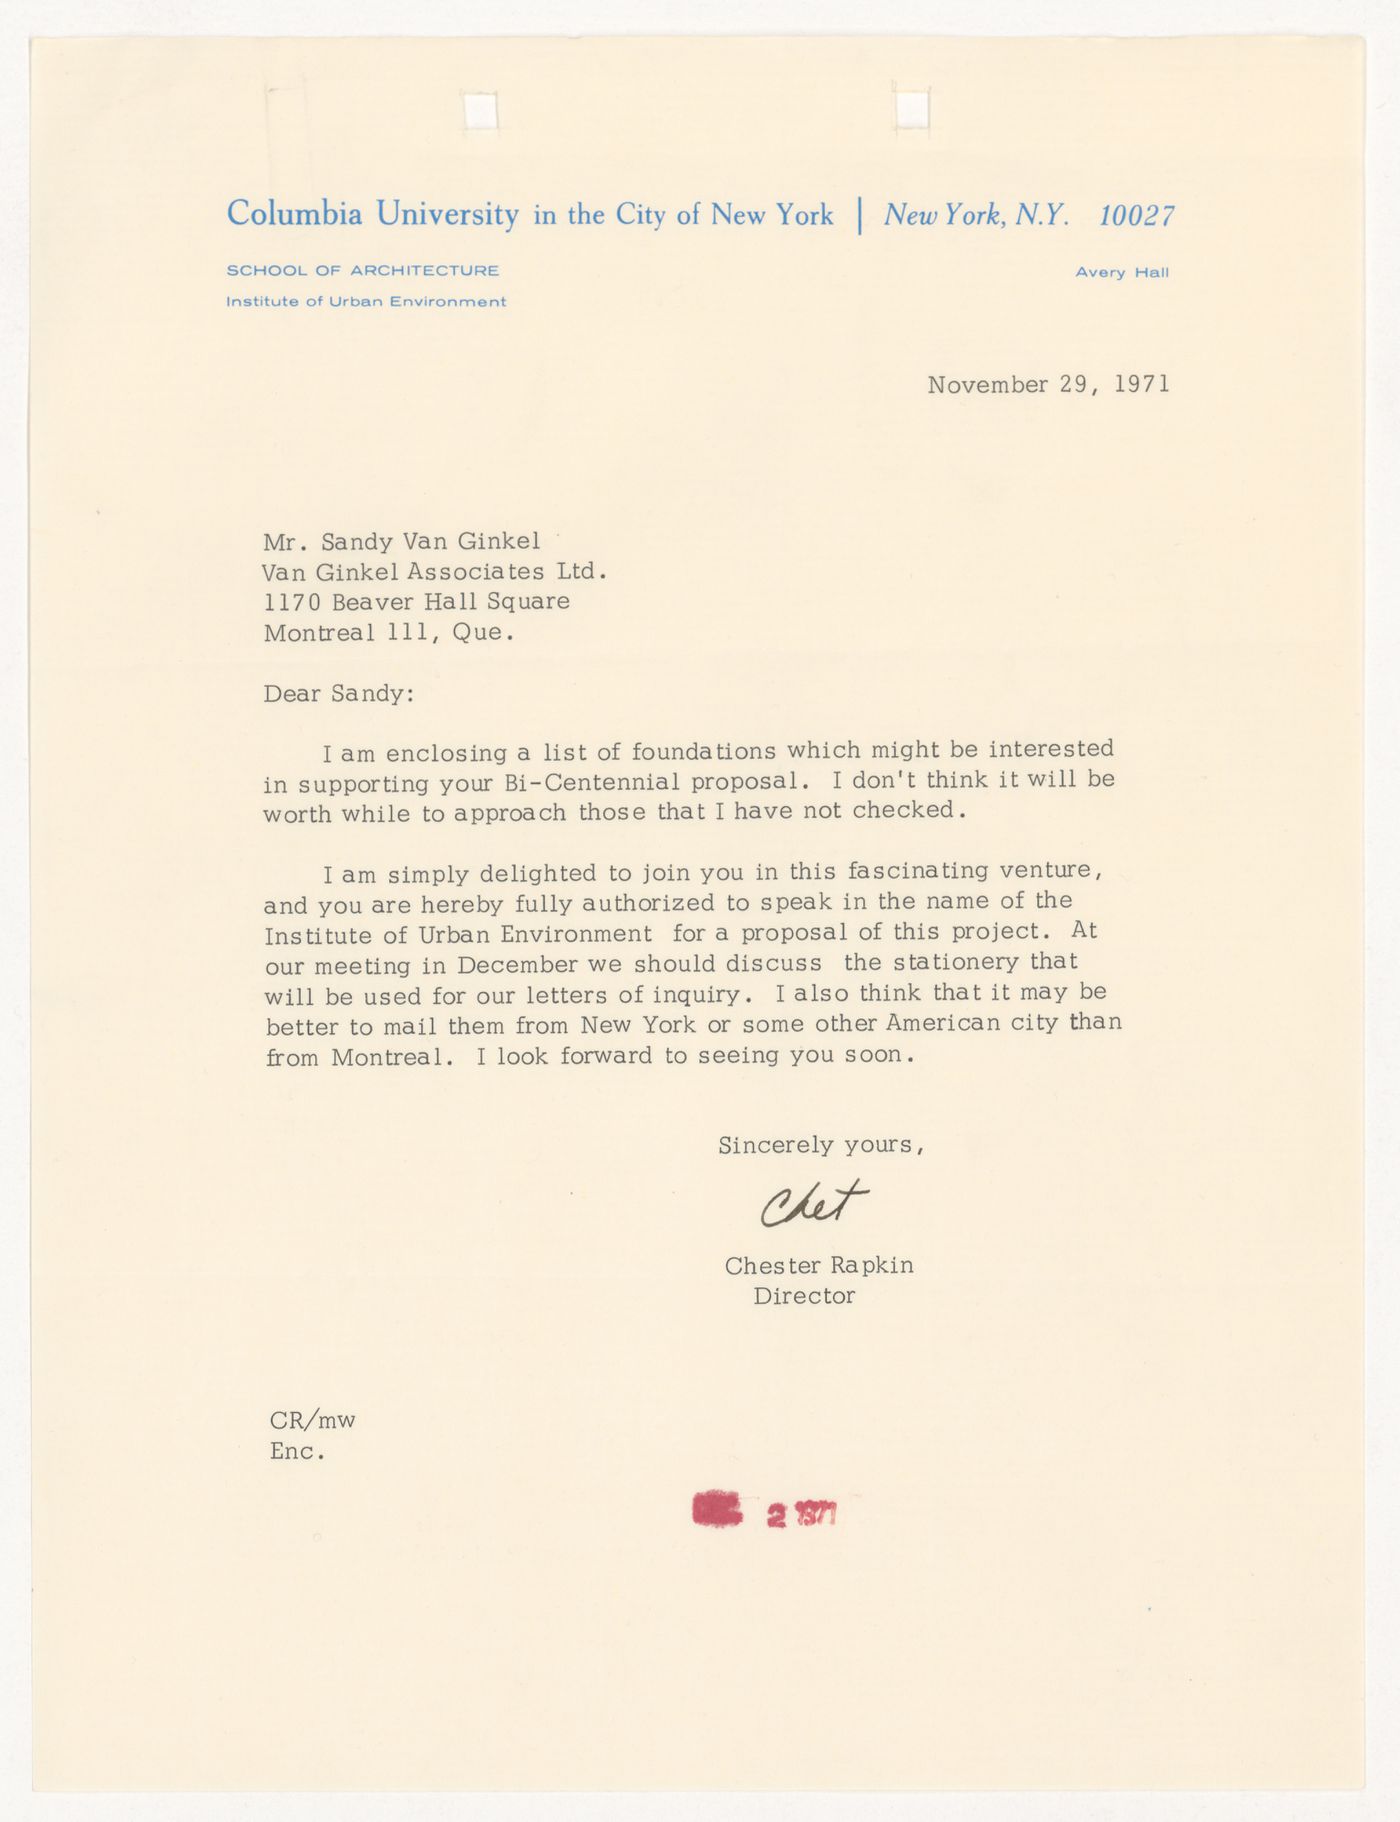 Letter from Chester Rapkin to to H. P. Daniel van Ginkel for United States One (U.S. 1)